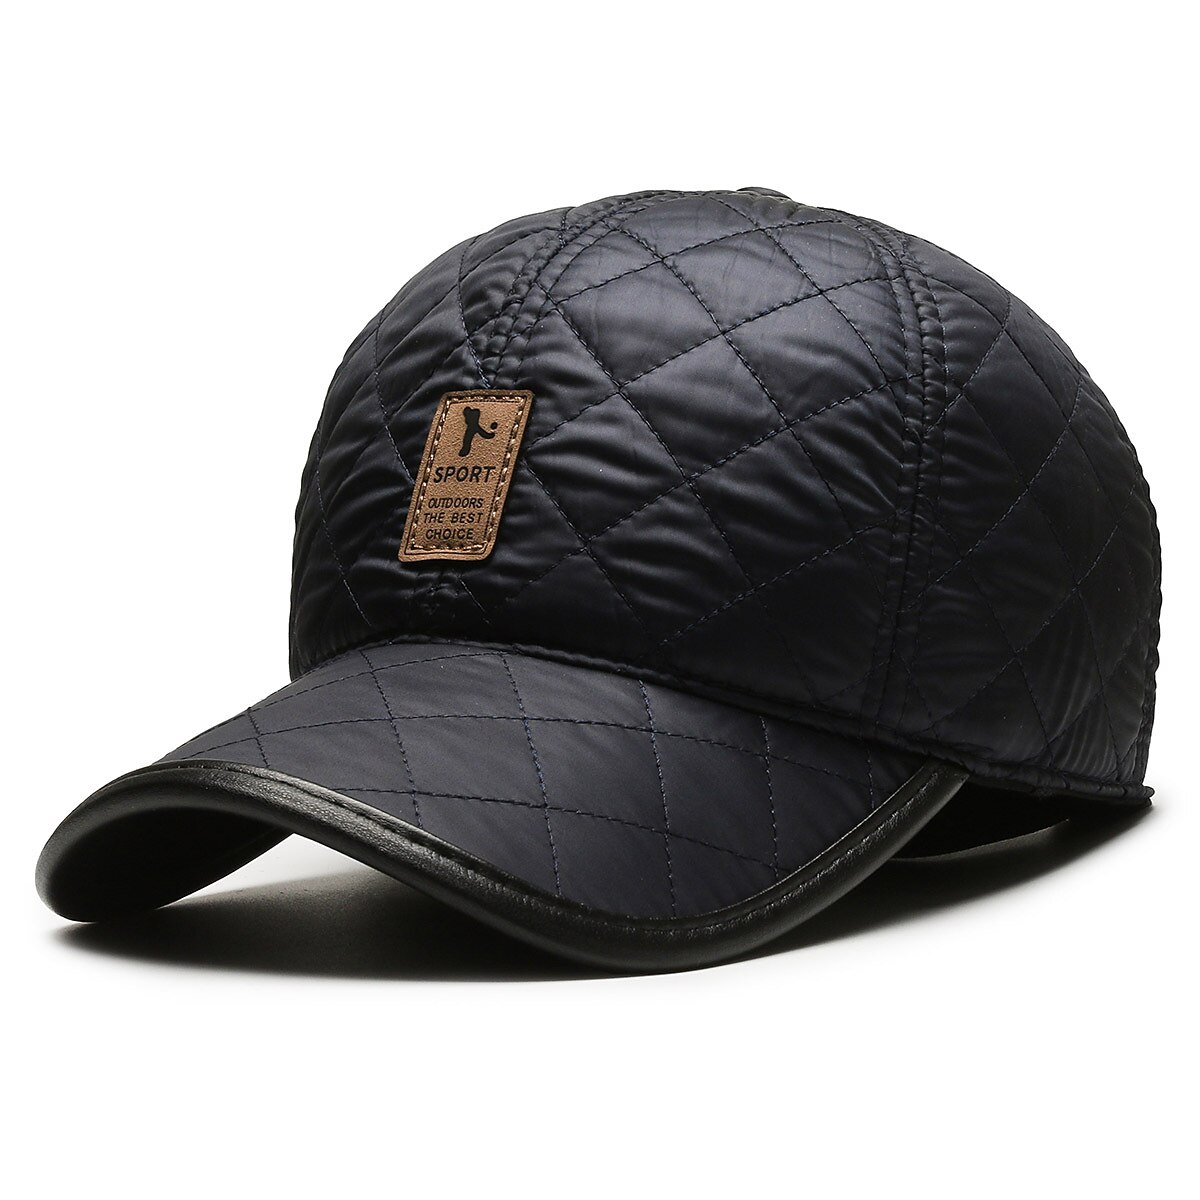 Men's Winter PU Leather Warm Outdoor Vacation Plain Thermal Adjustable Windproof Fashion Baseball Cap